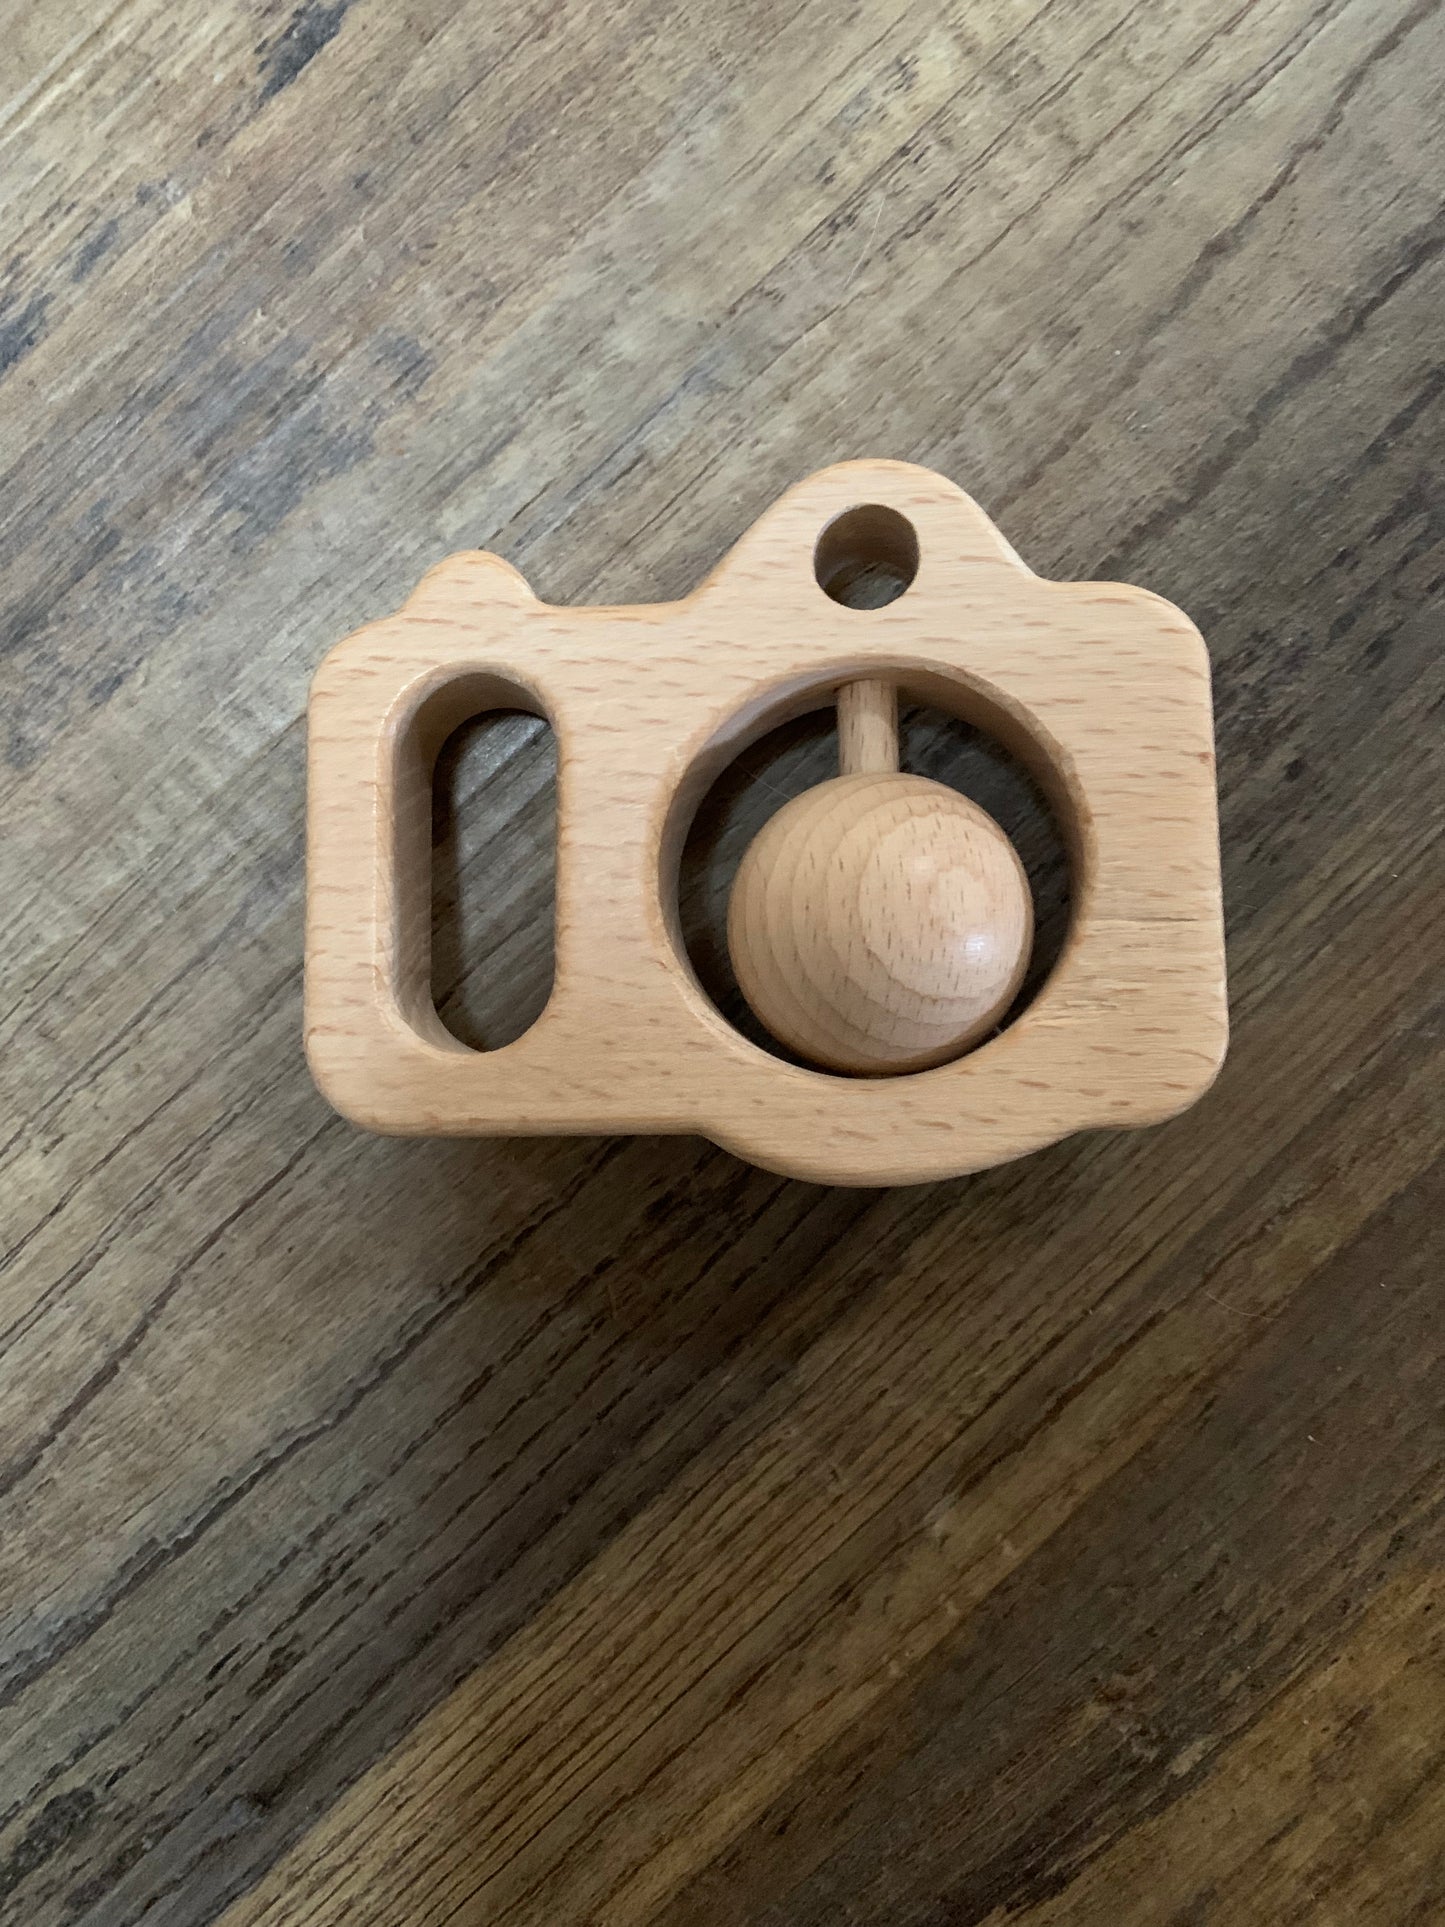 Camera wooden rattle teether toy